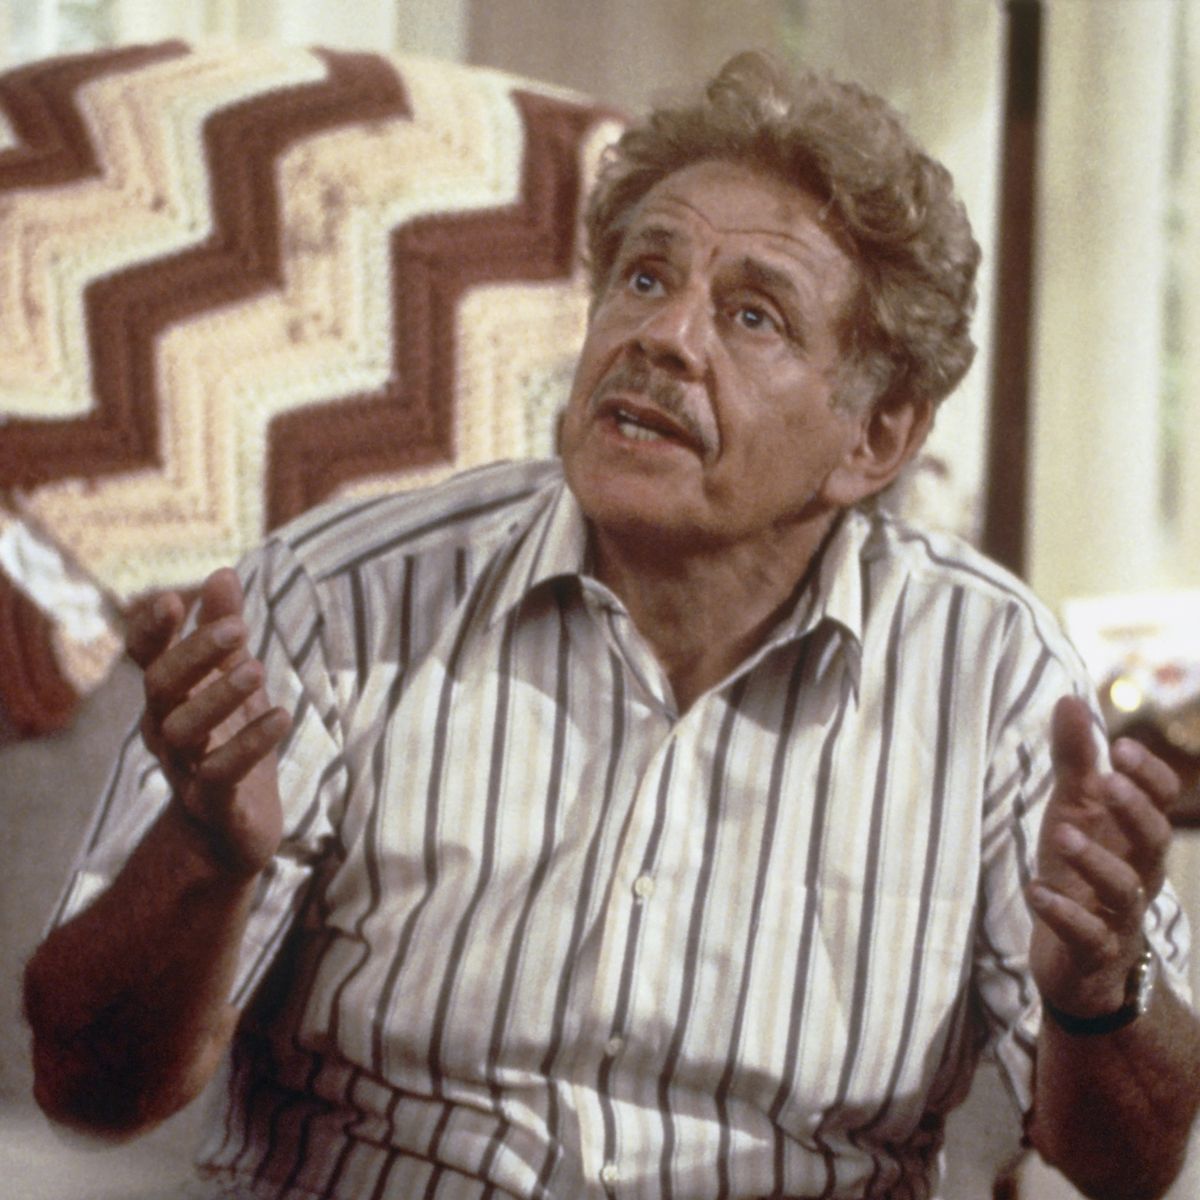 seinfeld    the chinese woman episode 4    aired 101394    pictured jerry stiller as frank costanza  photo by michael yarishnbcu photo banknbcuniversal via getty images via getty images